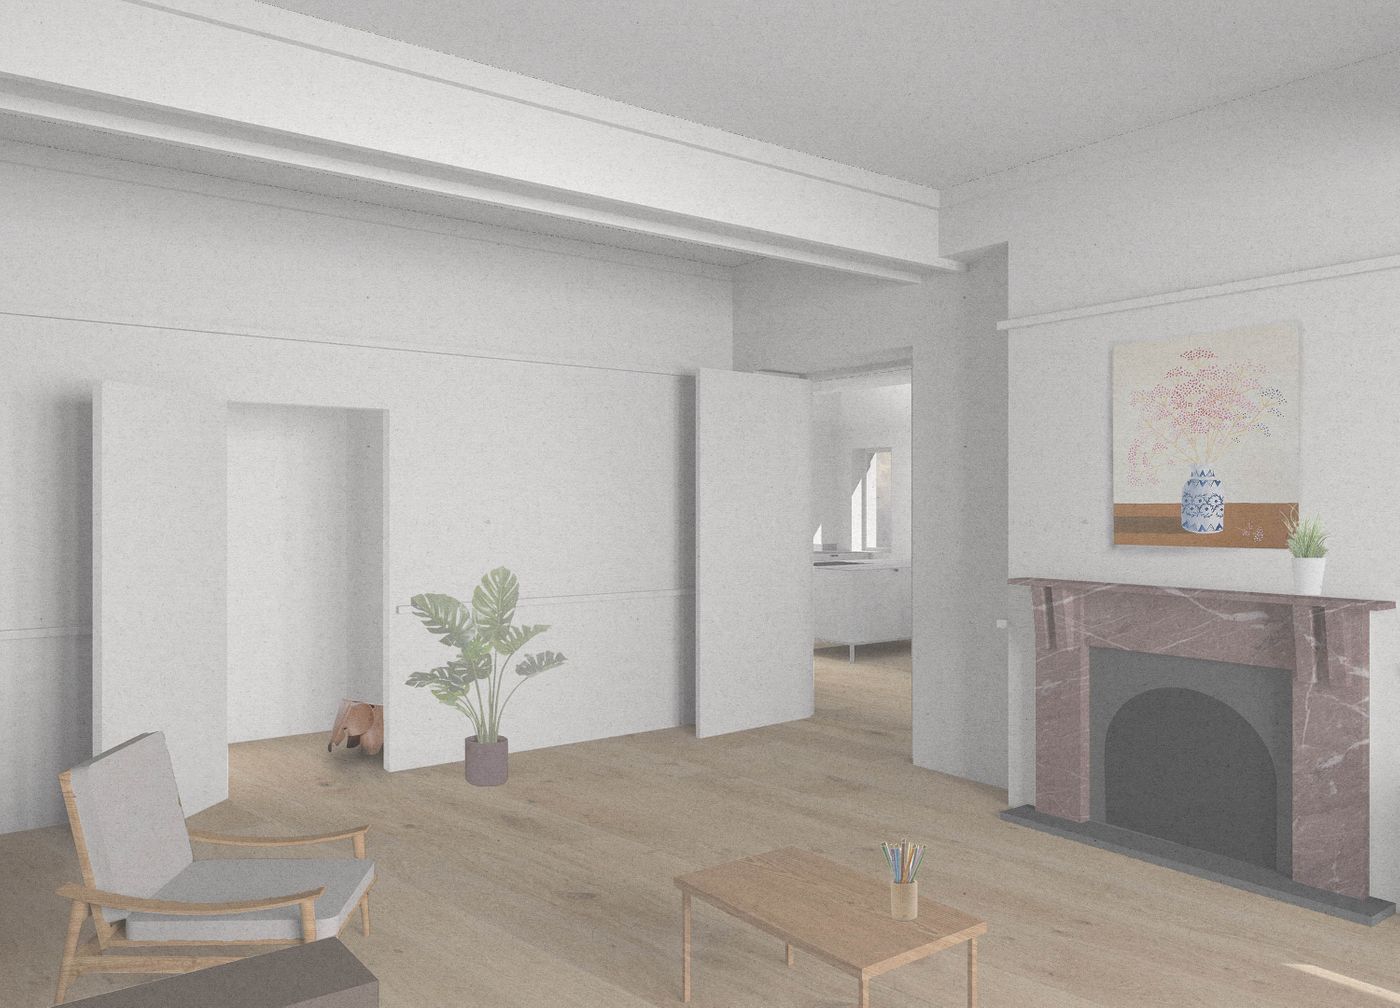 Proposed interior view of the new kitchen and dining space at Woodvale Road designed by From Works.